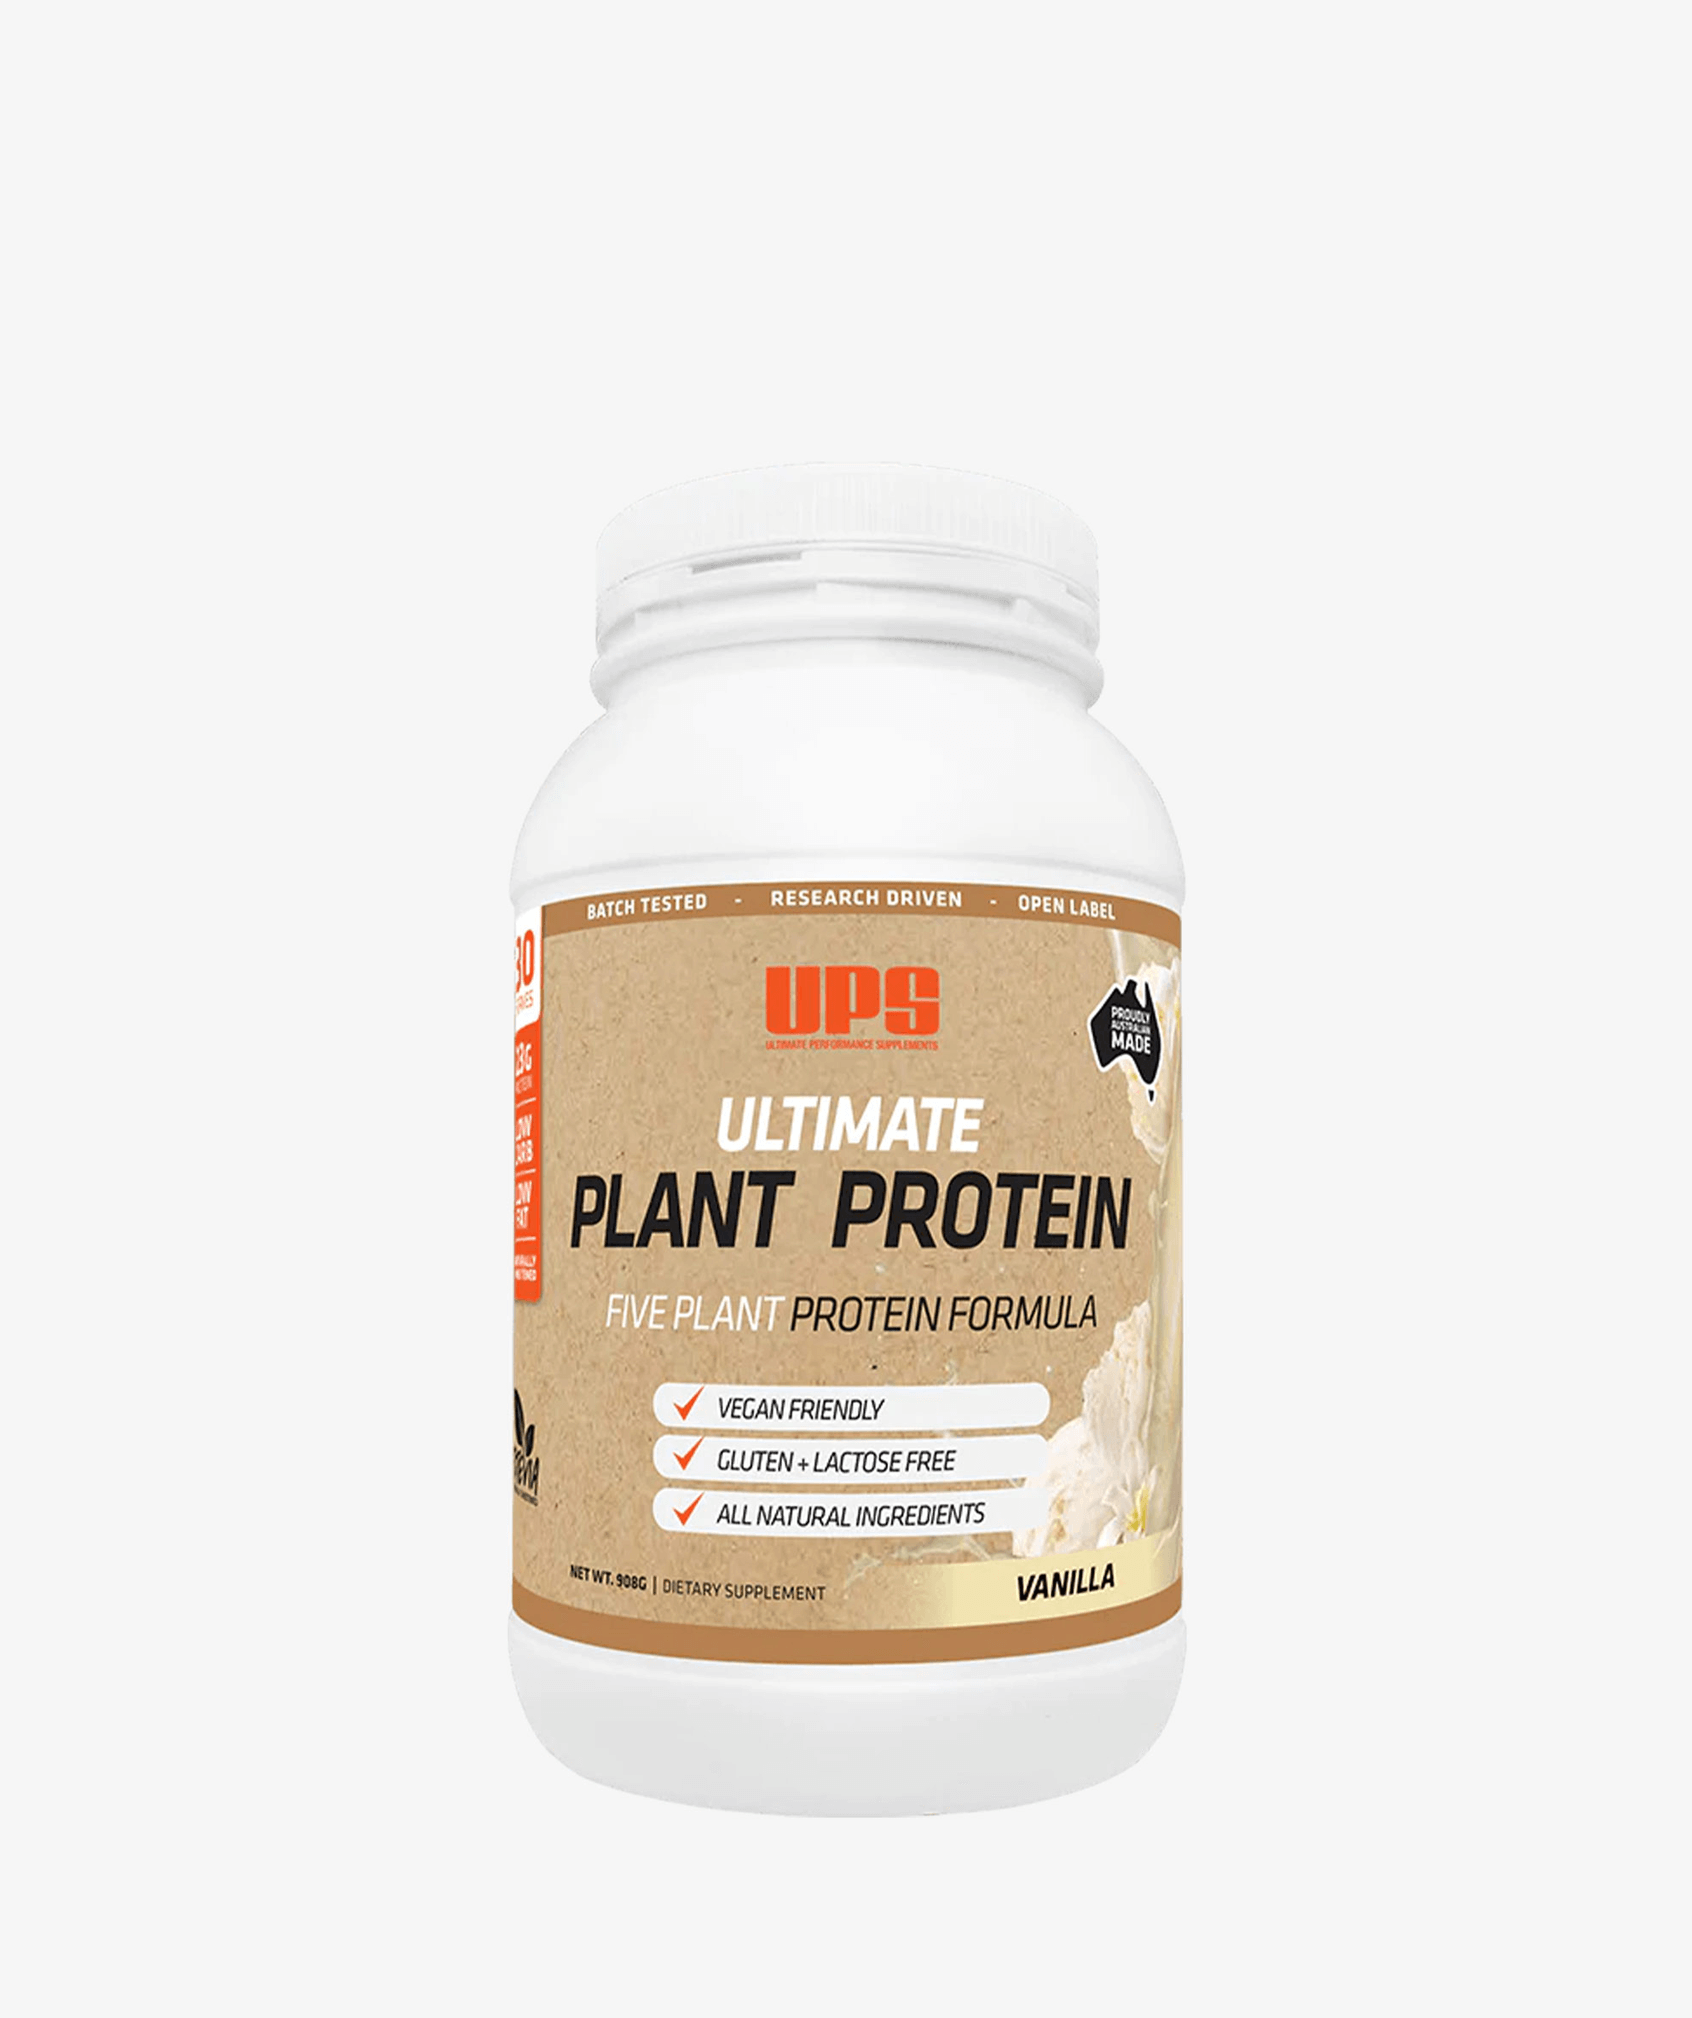 UPS Ultimate Plant Protein